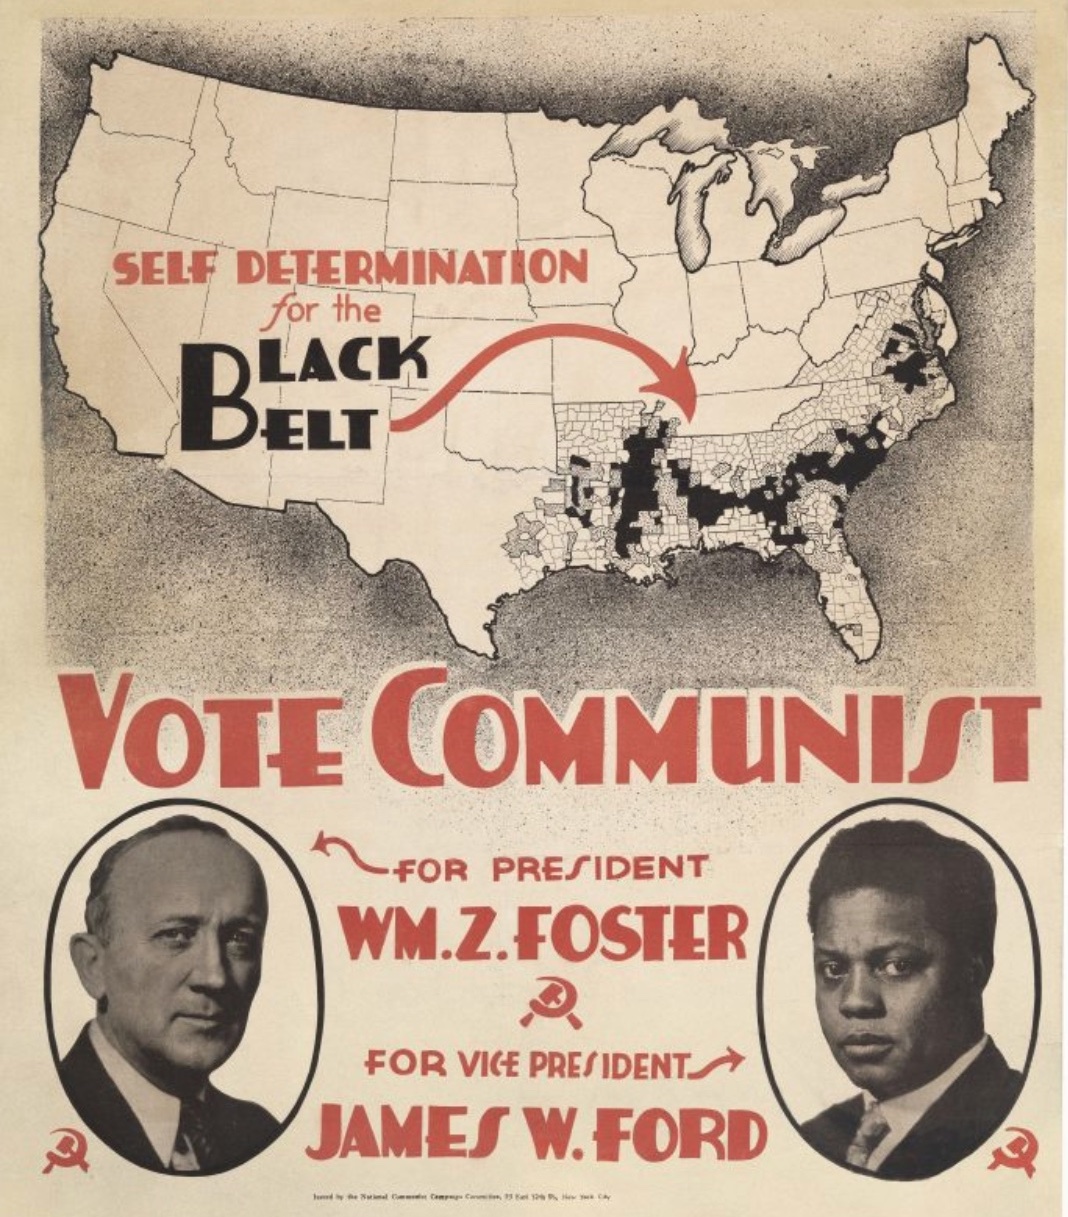 A 1932 election poster for the Communist Party in the USA